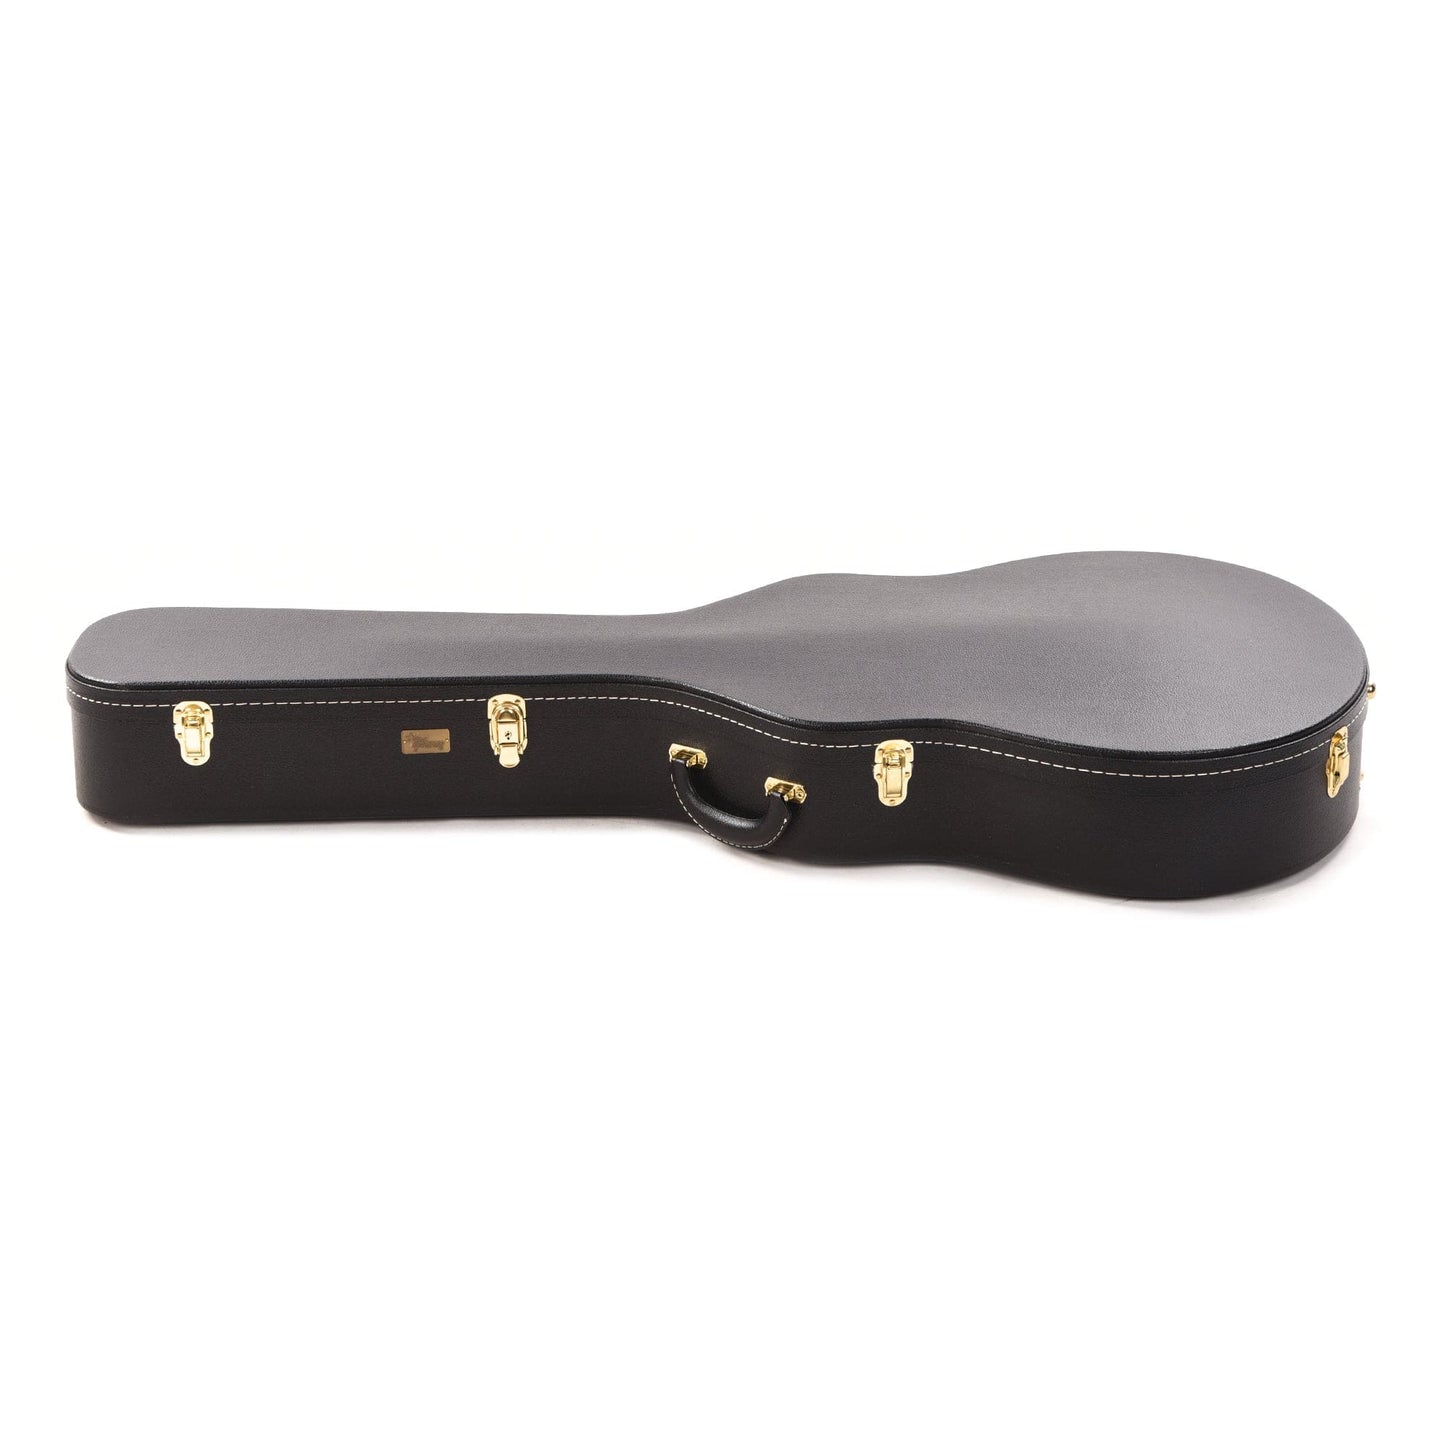 Lifton Historic ES-335 Hardshell Case Black/Goldenrod Accessories / Cases and Gig Bags / Guitar Cases